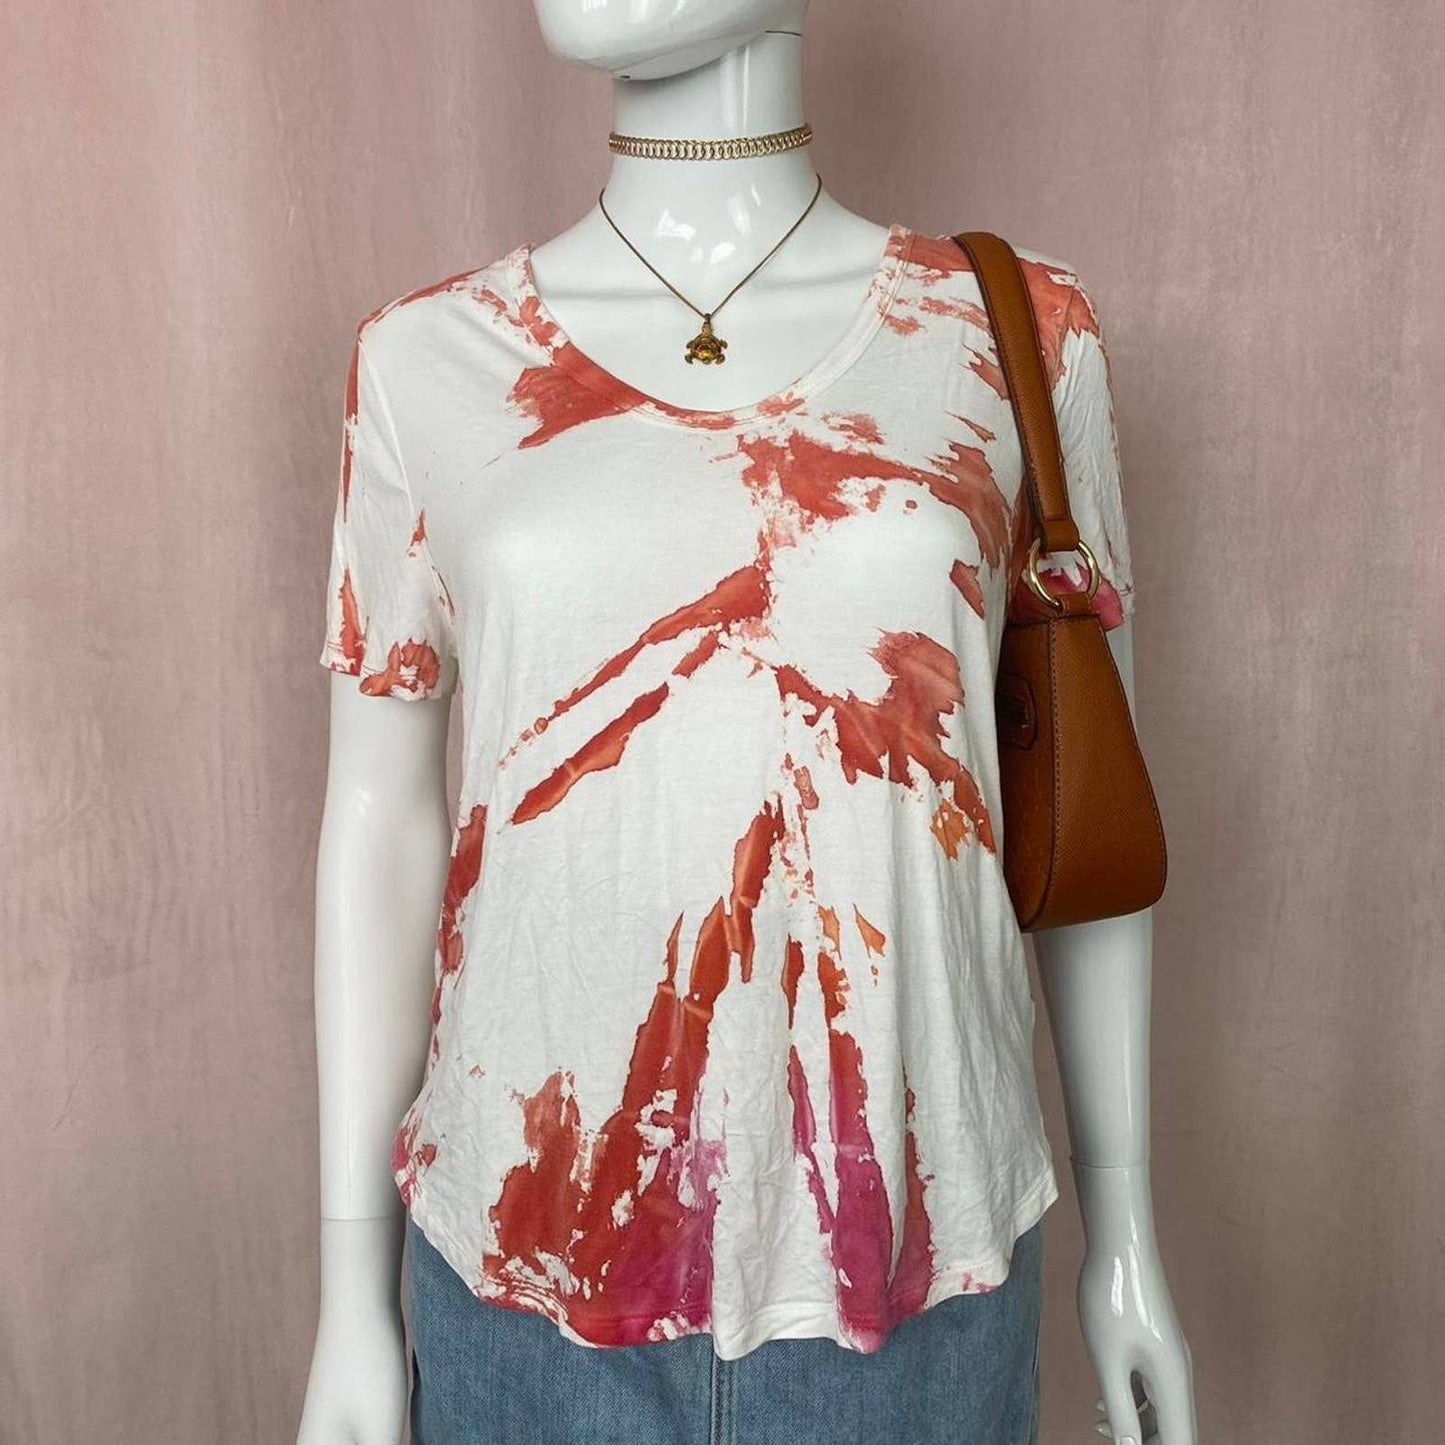 Secondhand A New Day Tie Dye V-Neck Stretch Tee, Size Medium